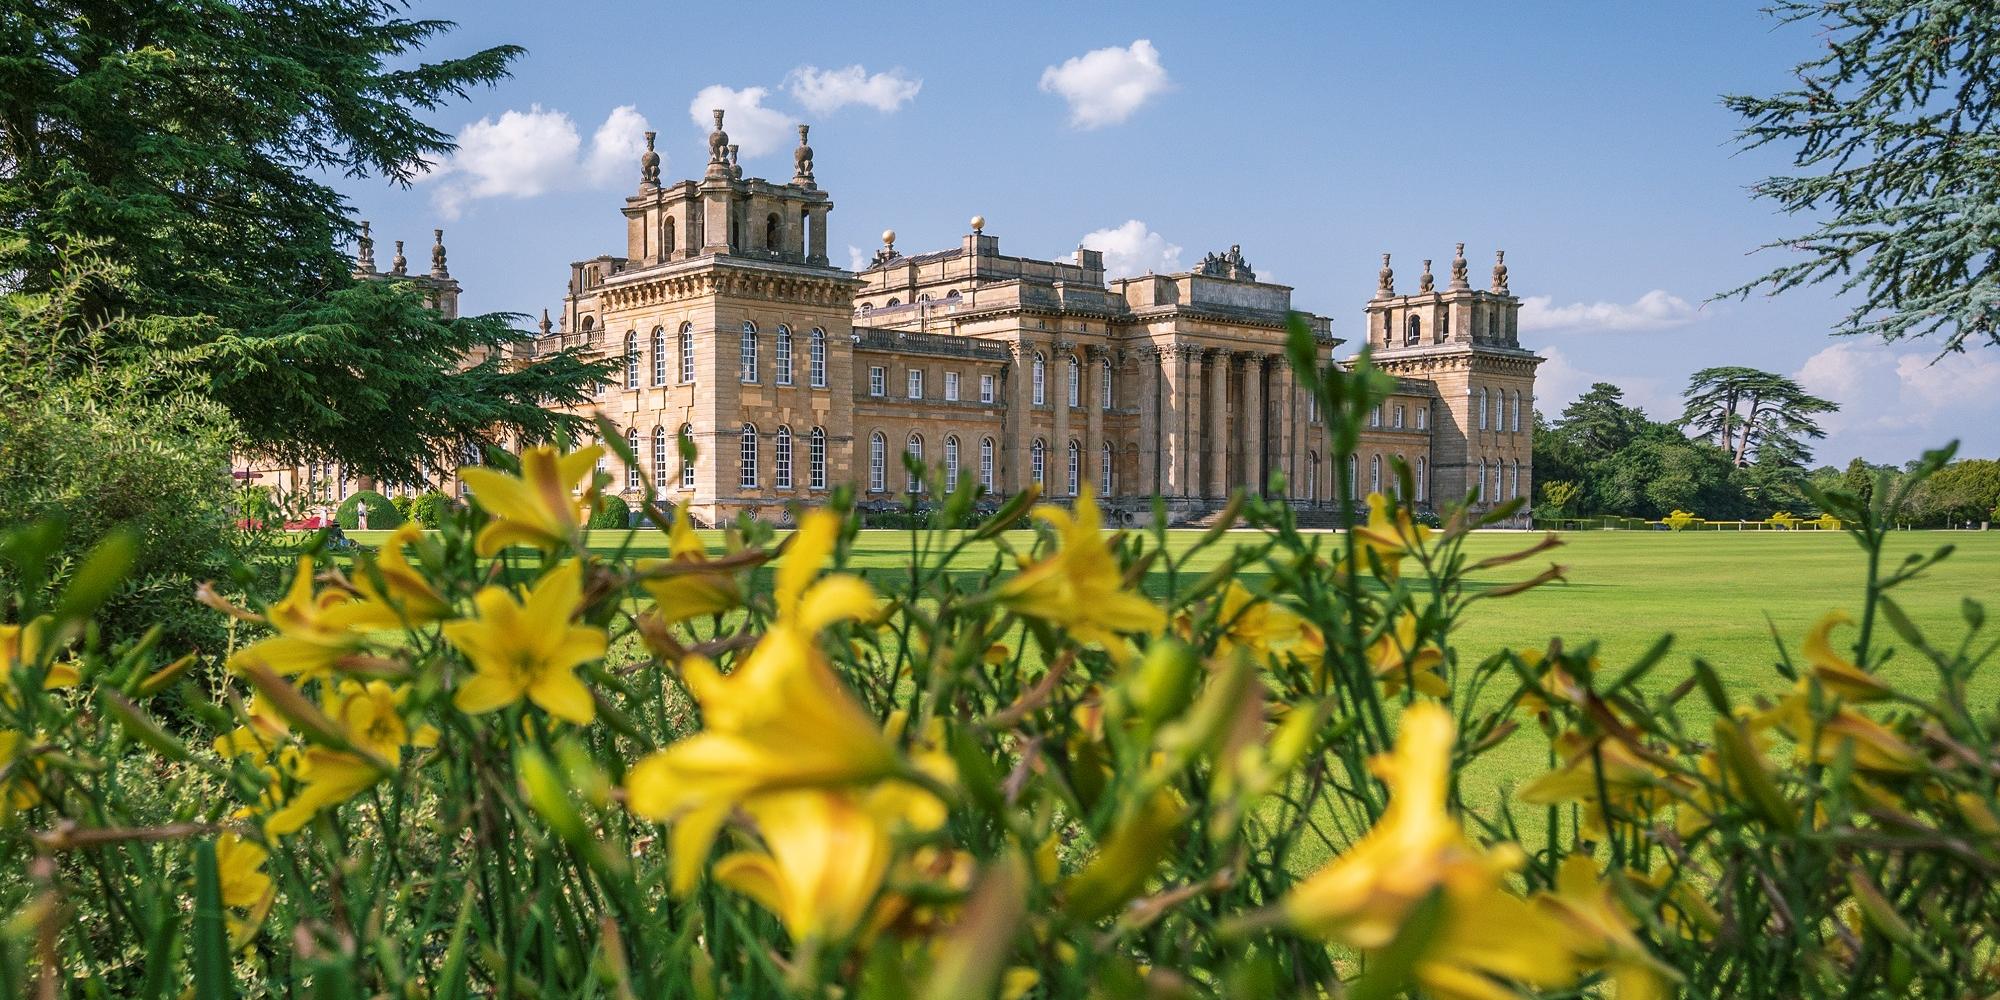 View over Daffodils towards the rear of the Palace